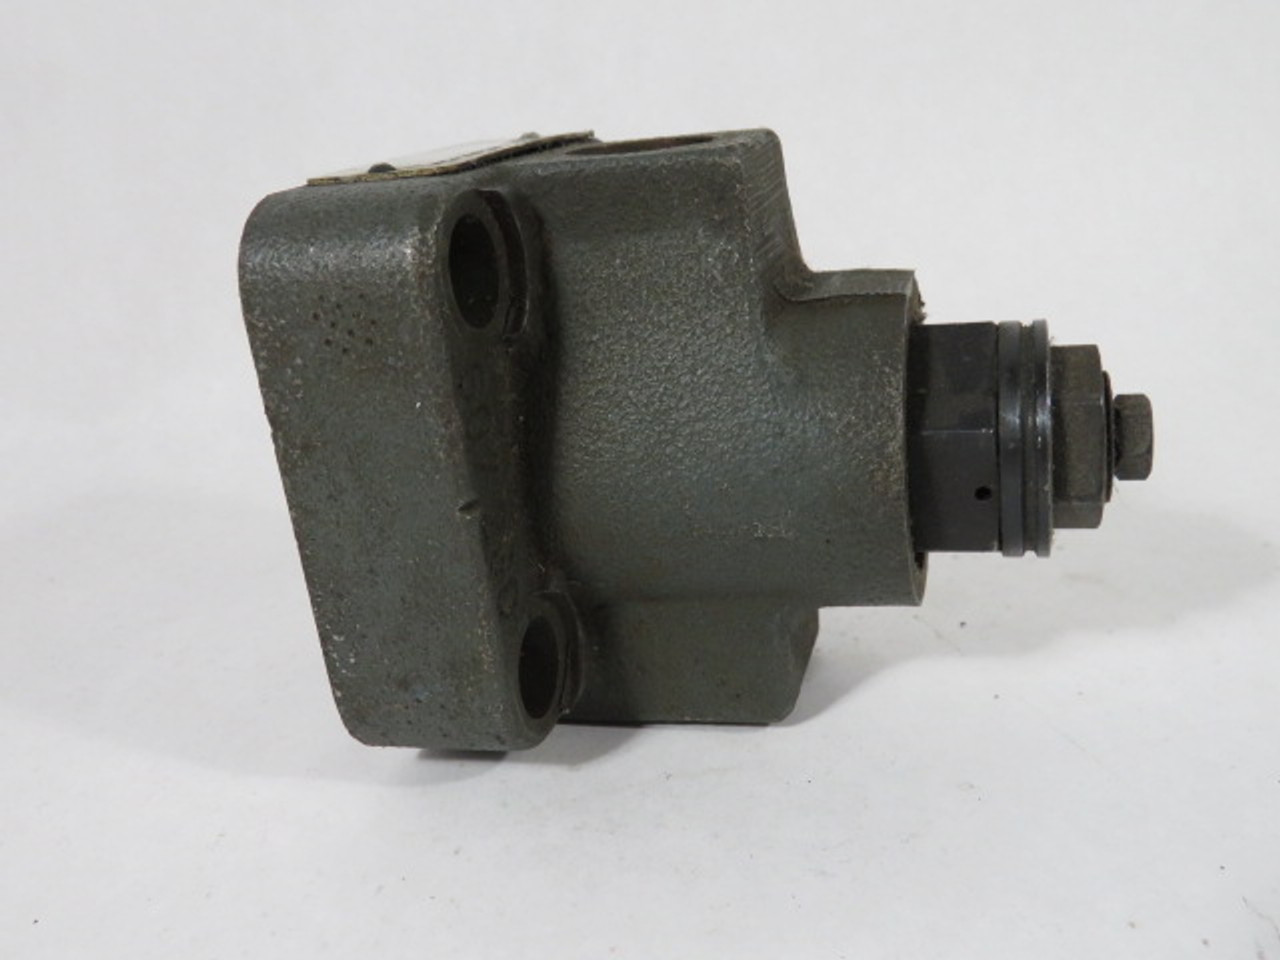 Rexroth DB10-2-42/100V/12-W65 Pilot Operated Pressure Relief Valve USED